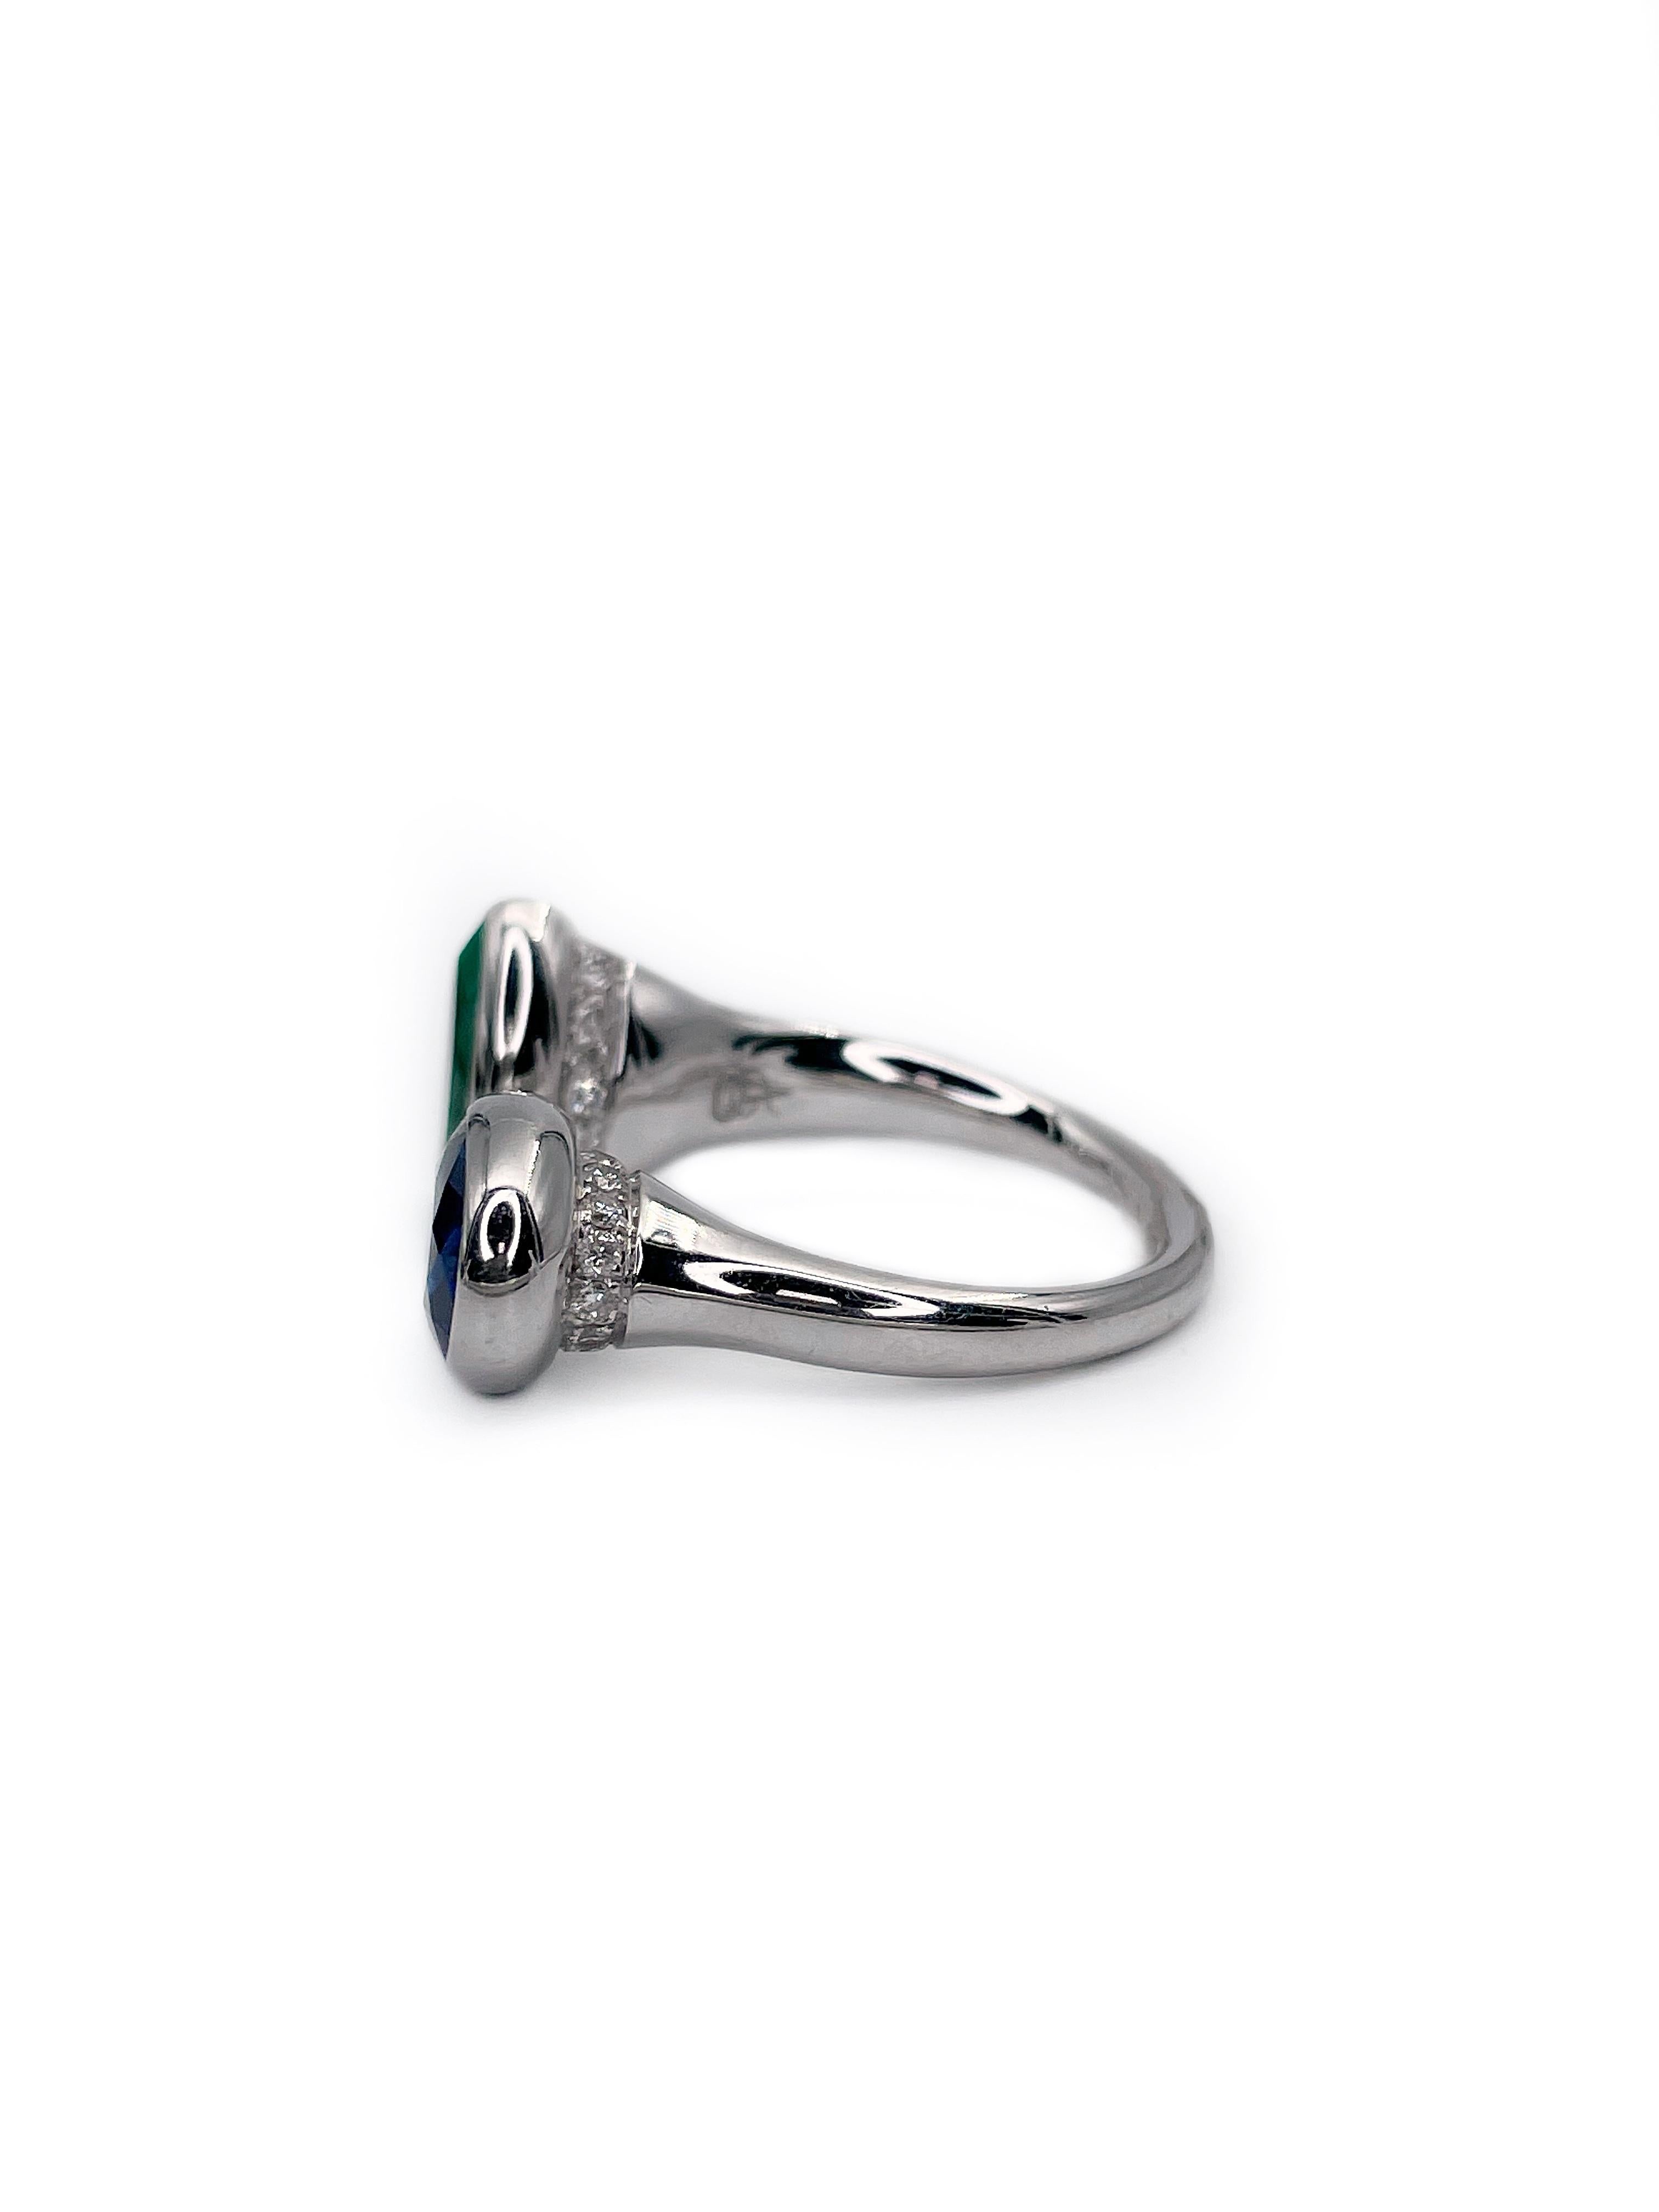 This is an open “Toi et moi” design ring in 14K white gold. It features a stunning pear shape 1.5ct natural very slightly bluish green emerald and oval shape natural heated 2.2ct violetinish blue sapphire. The gallery is subtly decorated with 29